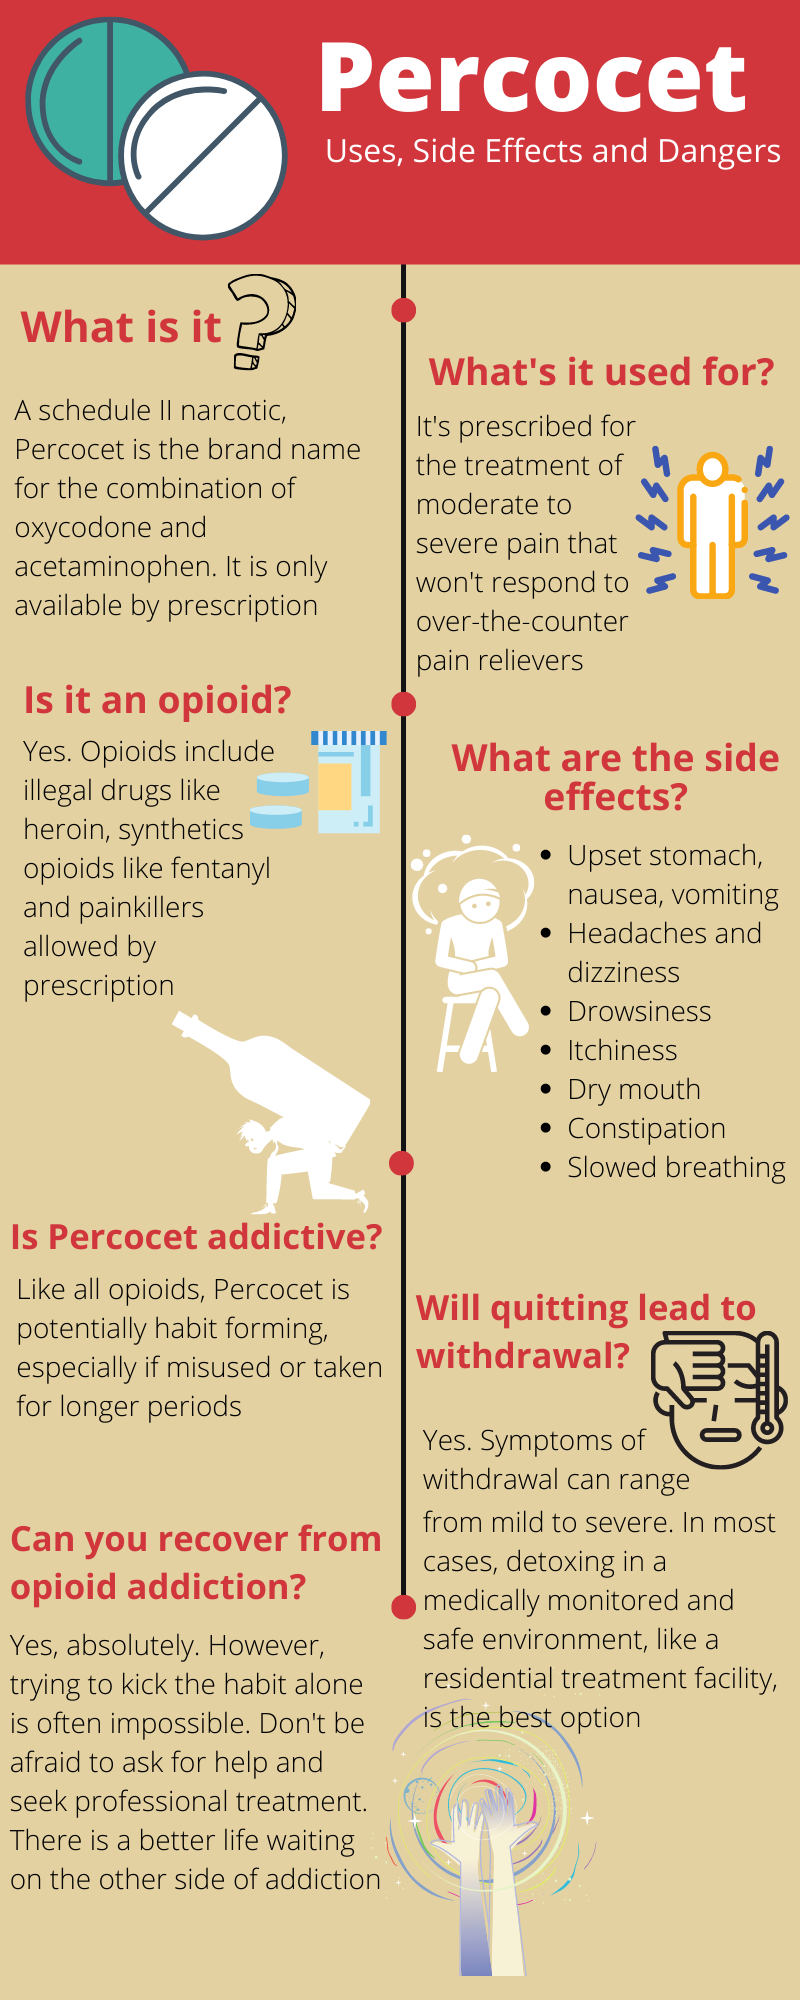 Percocet: uses, side effects and dangers